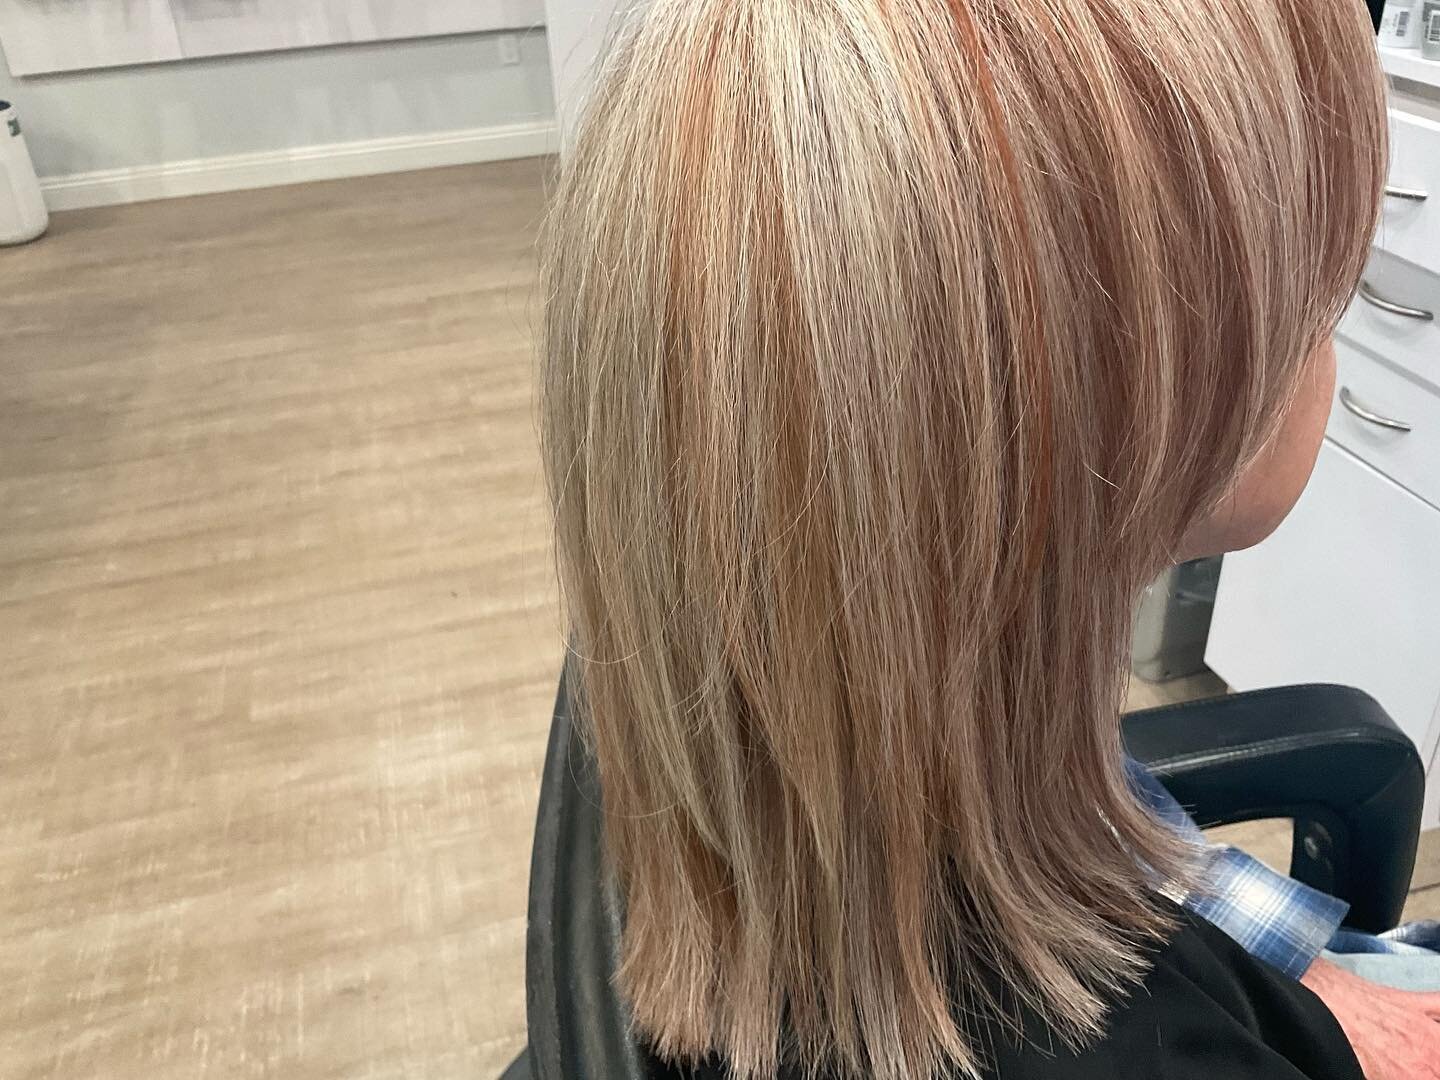 Going from gray to Sunkissed strawberry blonde incorporating natural gray and white hair #Makeover
#Blonde 
#Blonde highlights
#Color correction
#Hair color 
#Lajollablonde
#Sandiegoblonde
#Balayage
#Behindthechair
#Fallhair
#Haircolor
#Balayage
#Bru